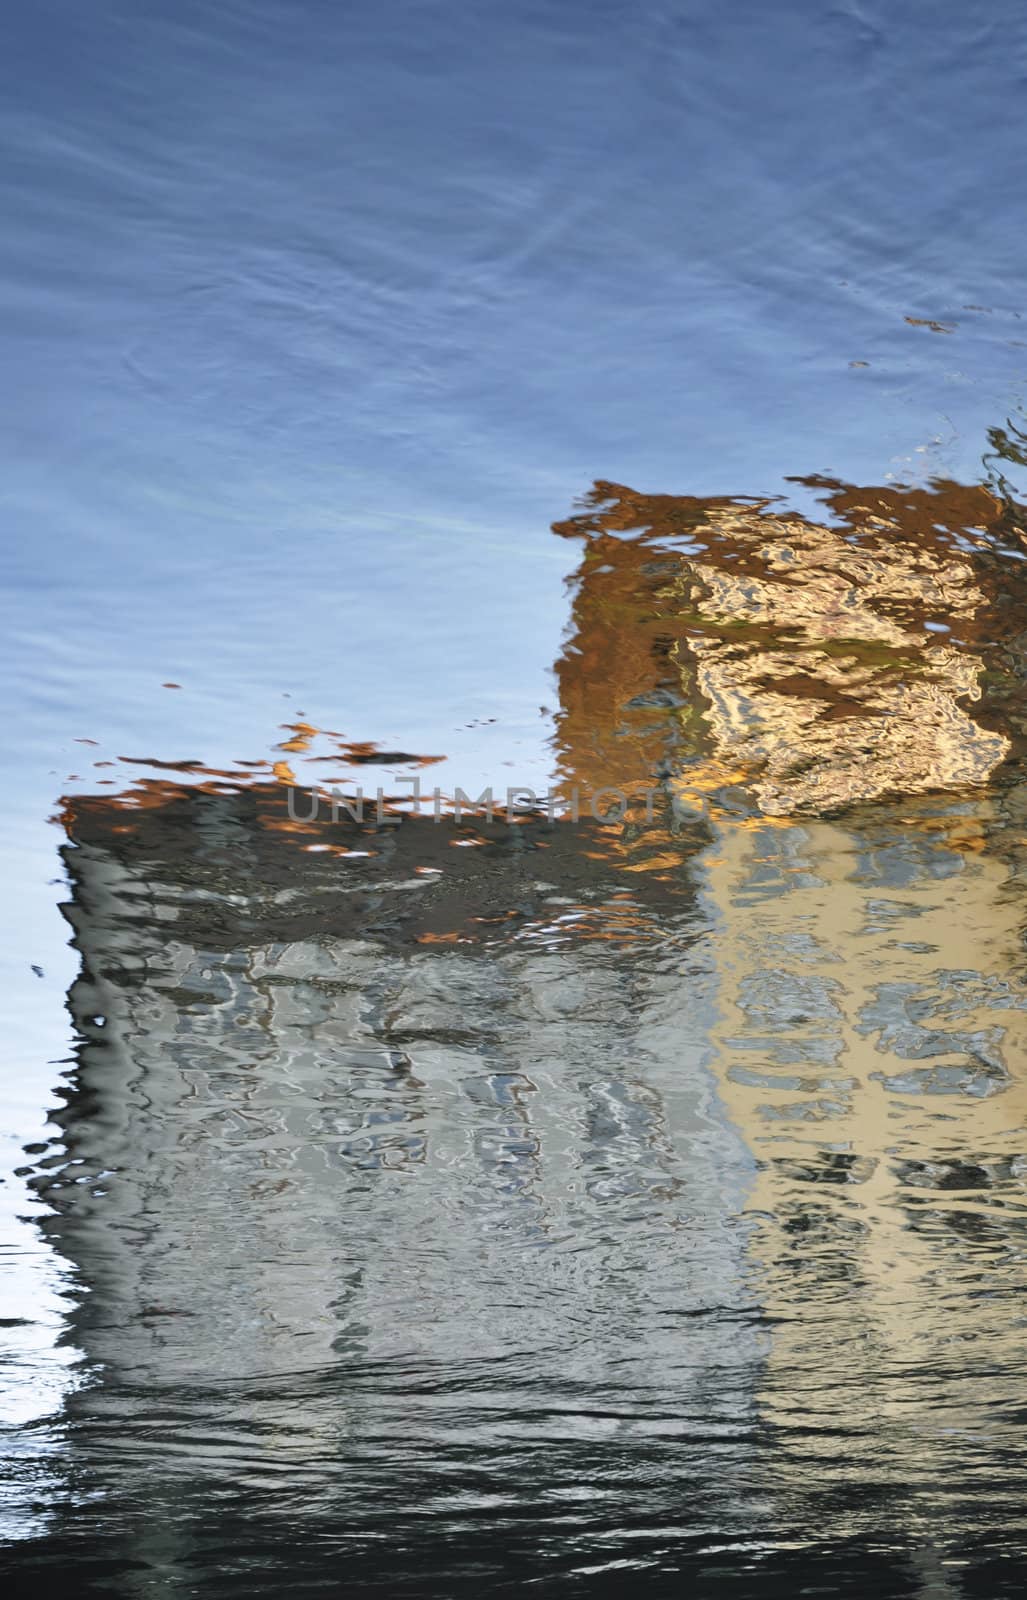 The Reflection Of An Old Building In The Water